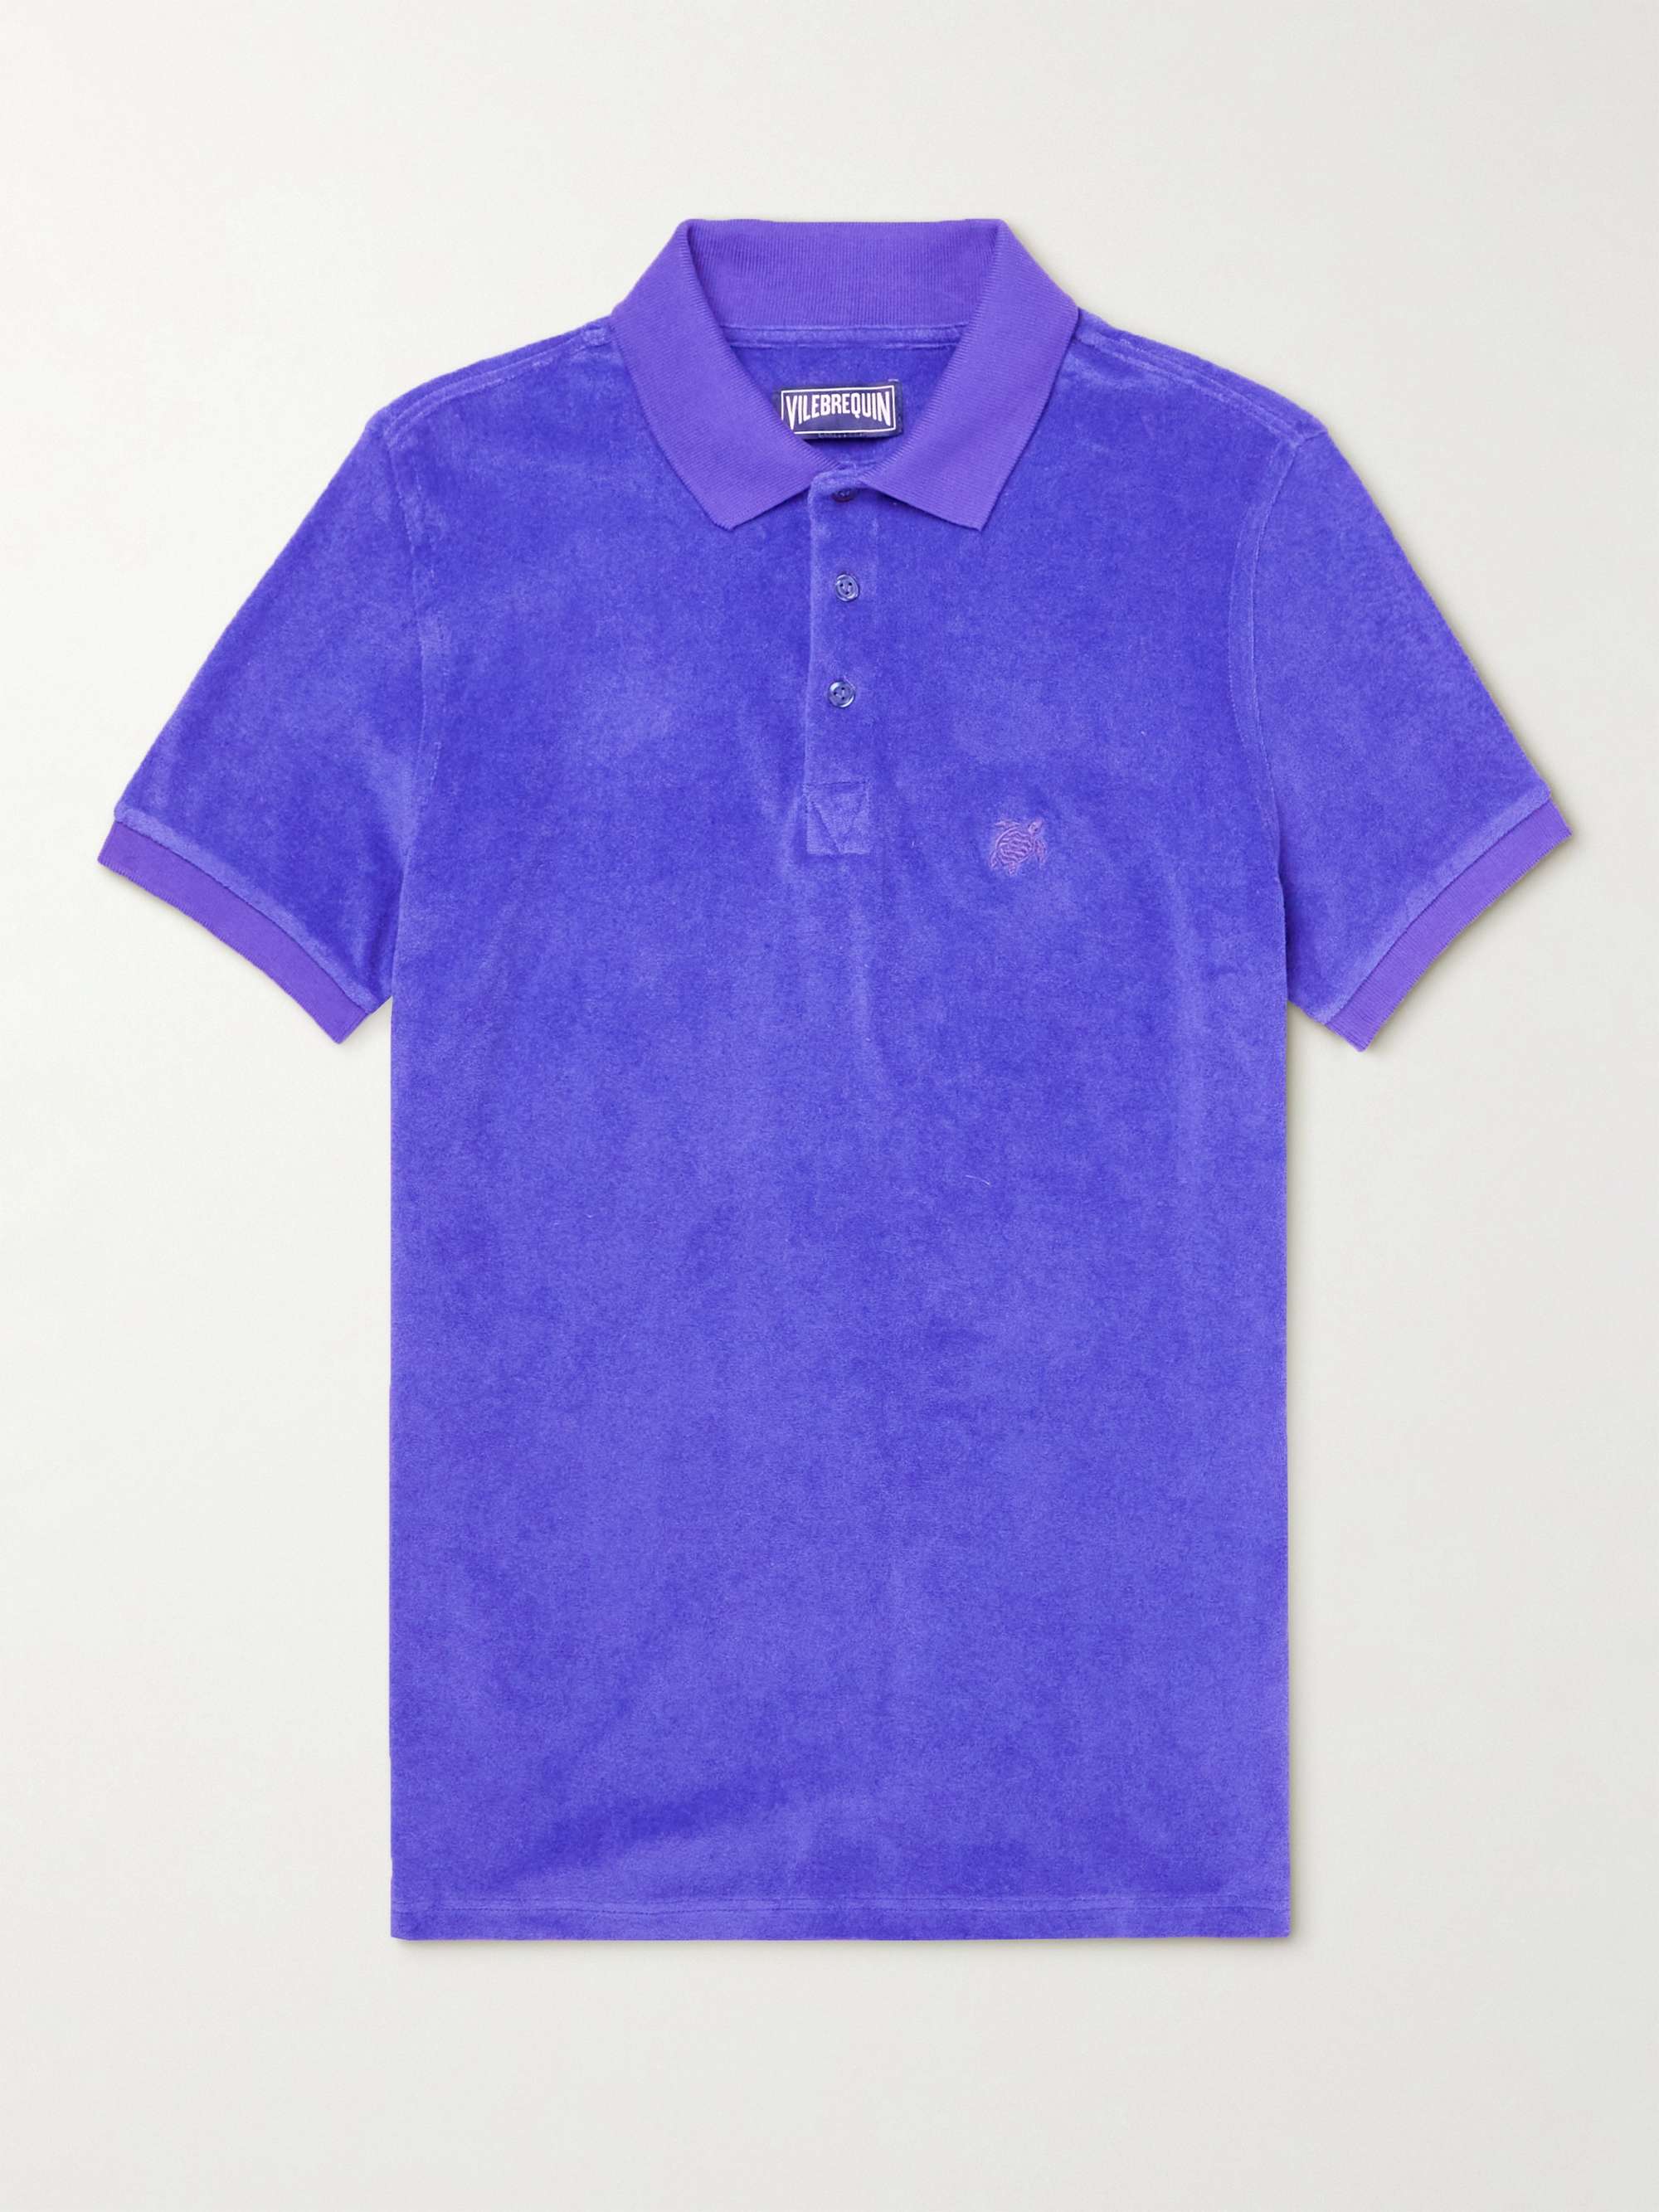 Blue Pacific Logo-Embroidered Cotton-Blend Terry Polo Shirt | VILEBREQUIN |  MR PORTER